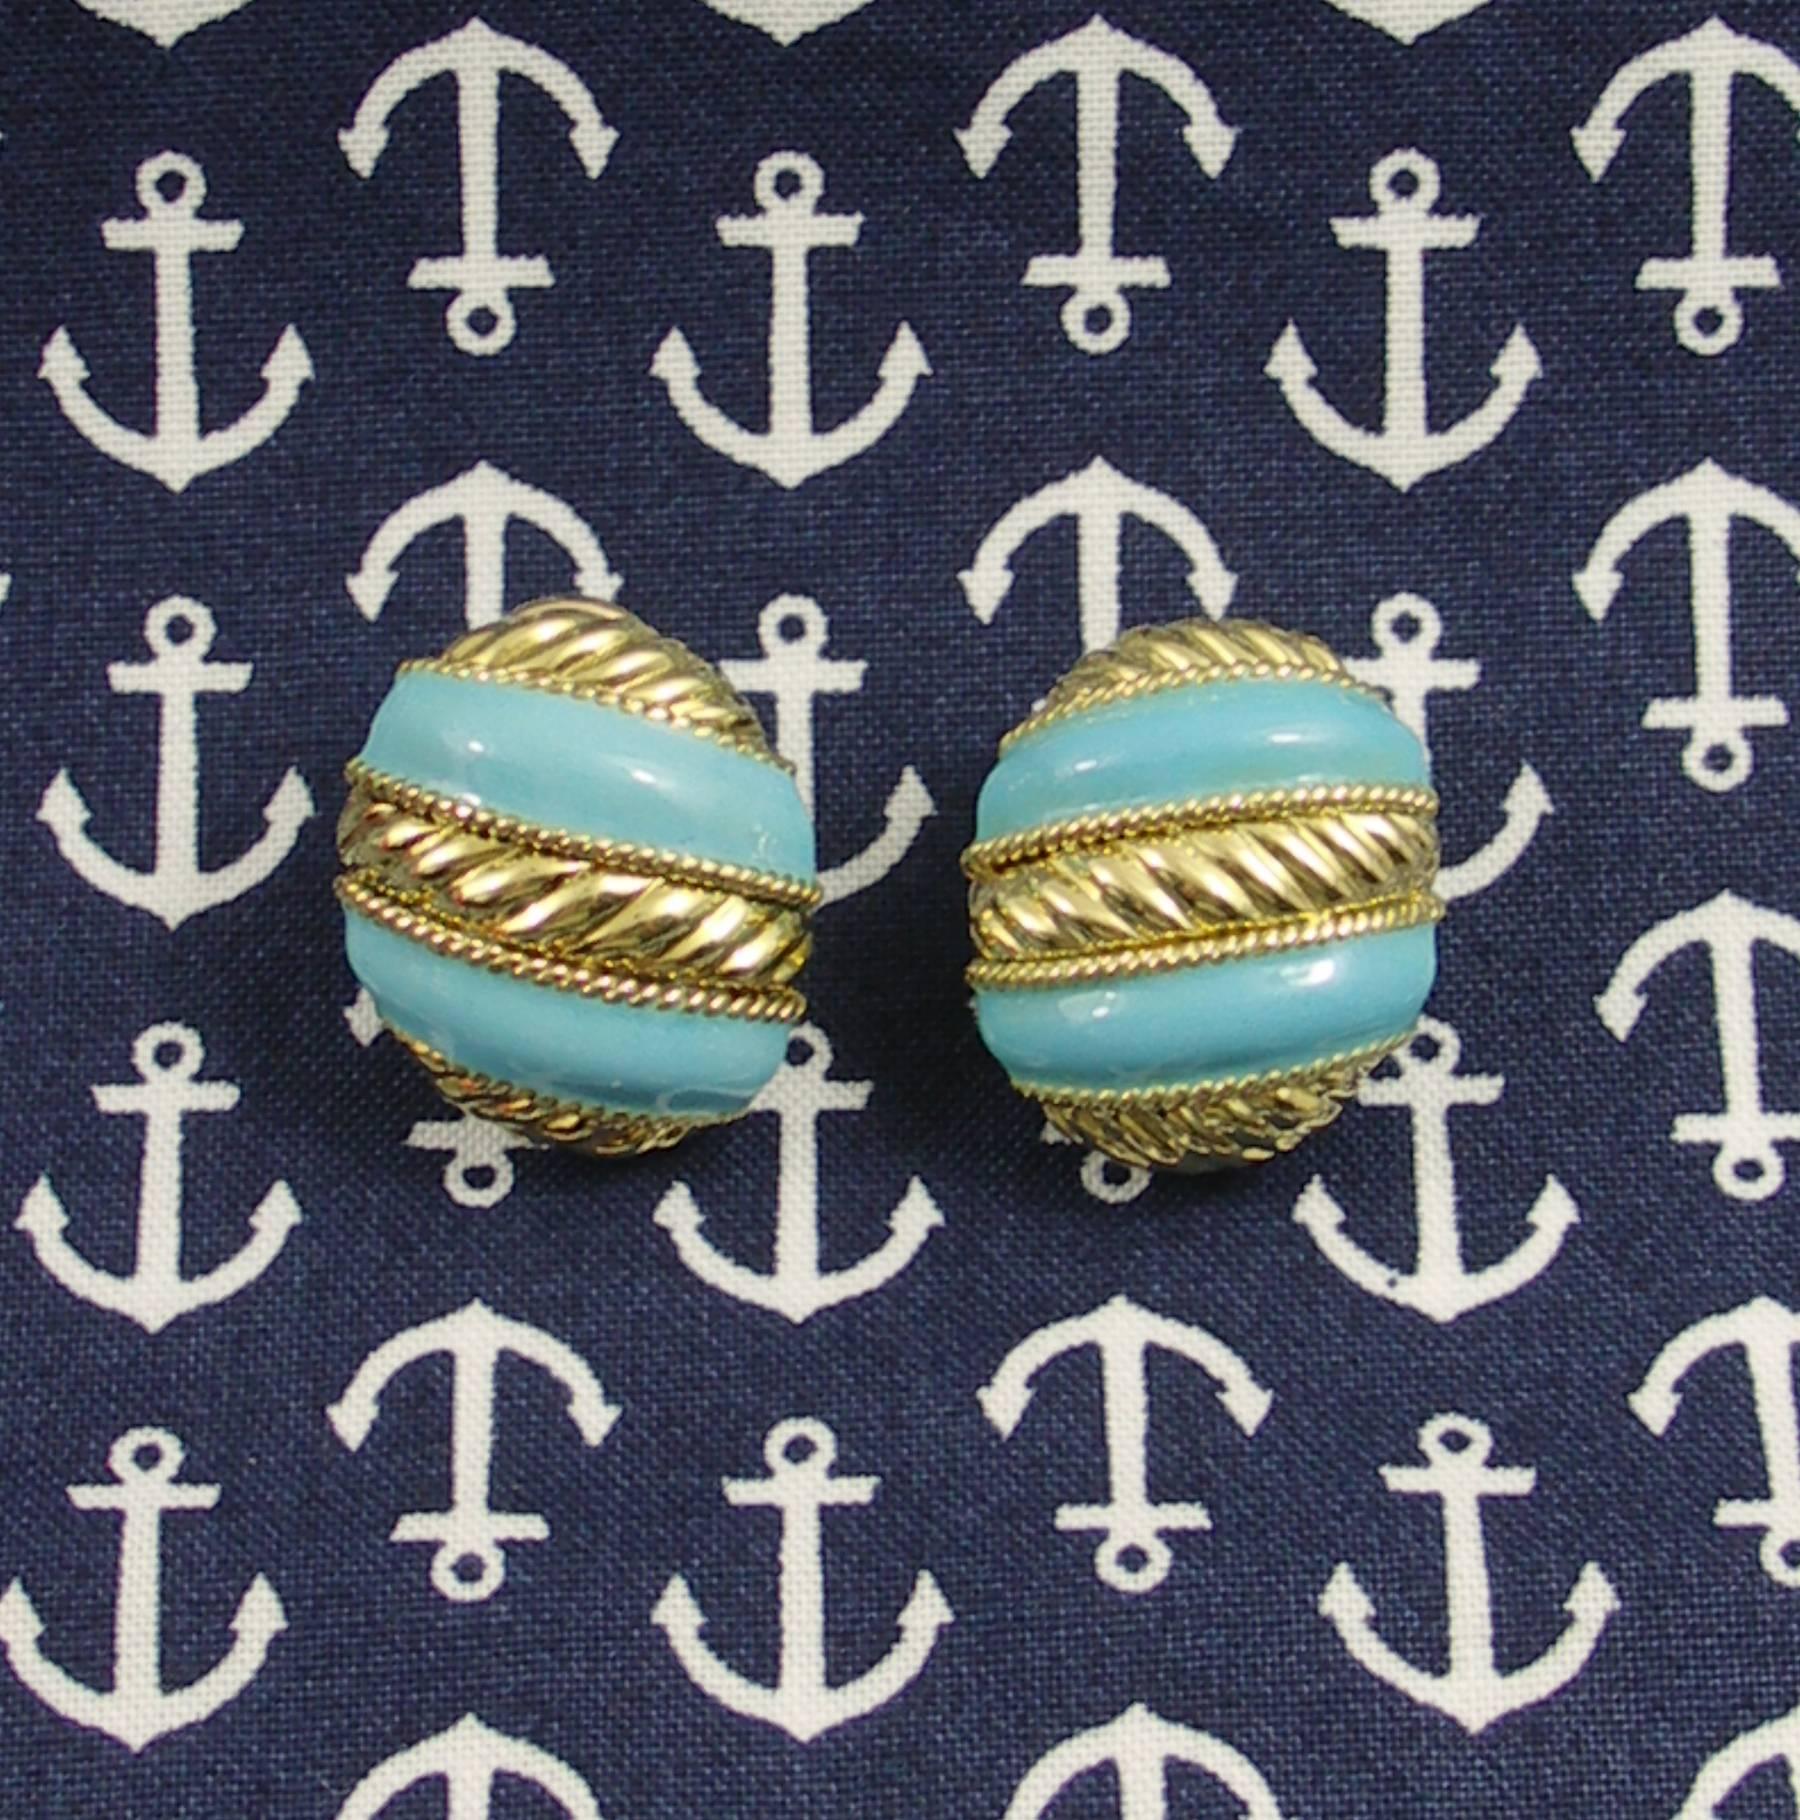 A pair of ladies 18K yellow gold earrings measuring 1 inch long and 7/8 of an inch wide, with a twisted rope design, and colored with turquoise blue enamel.